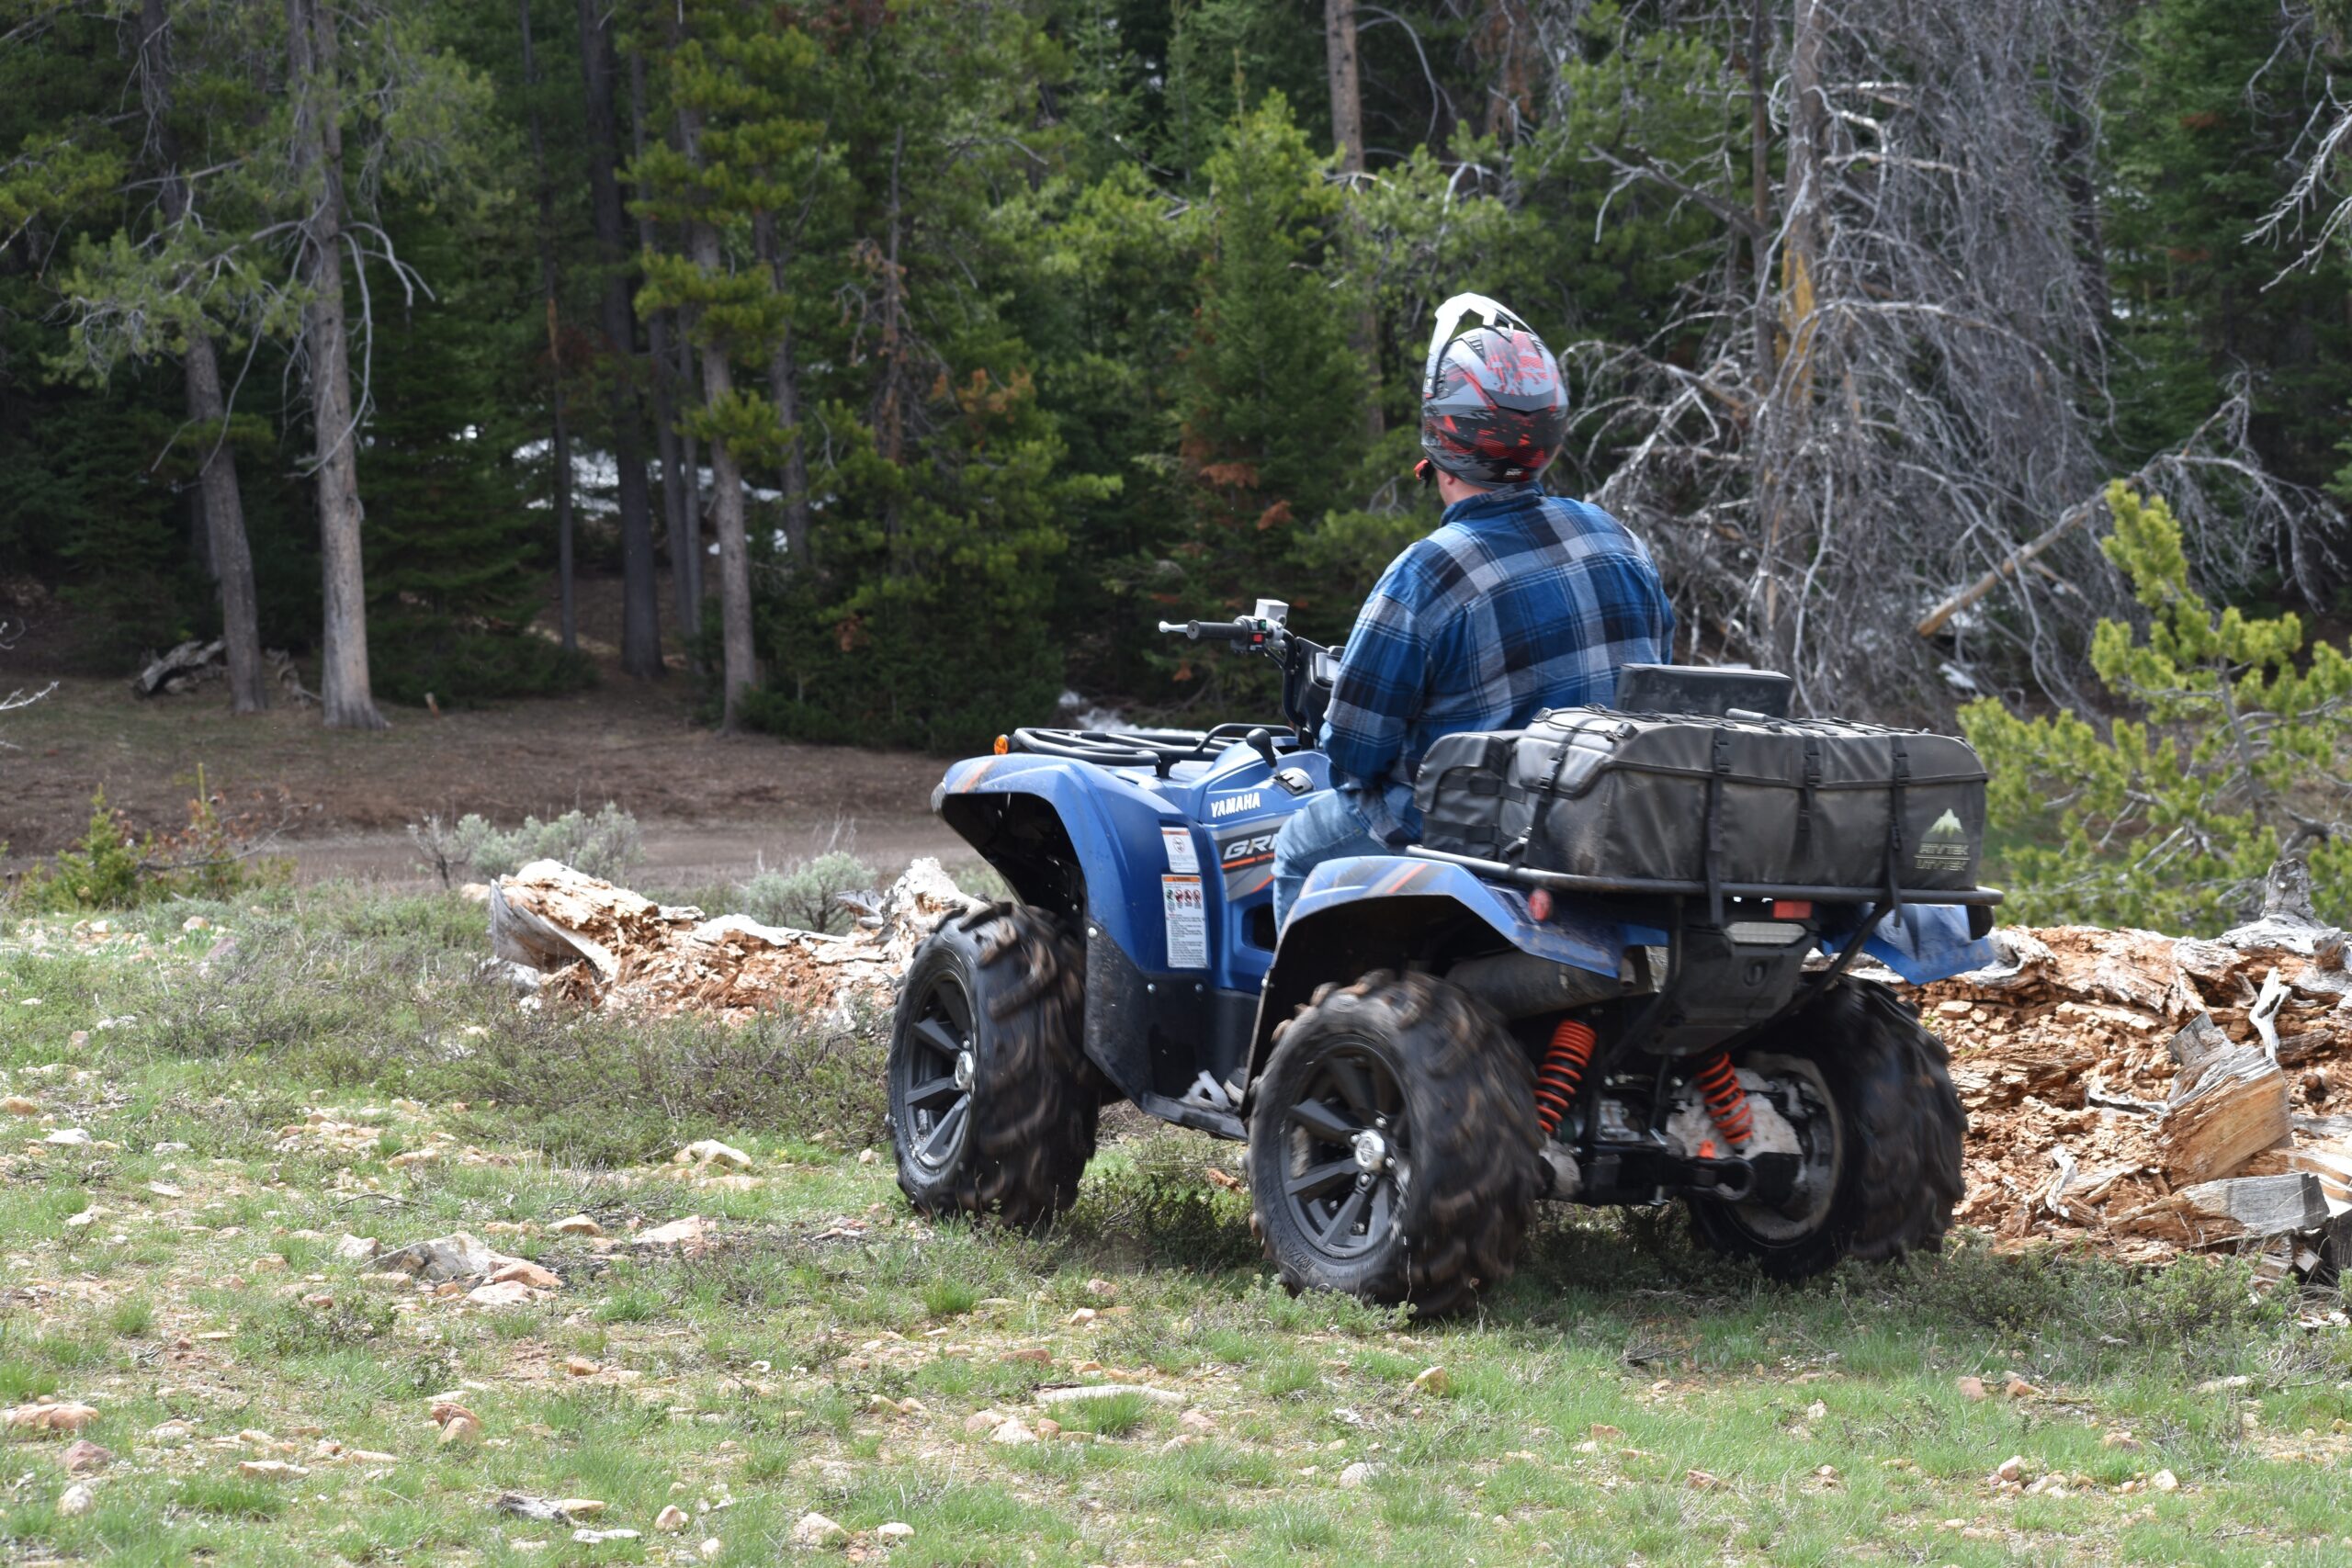 This is a man riding a Polaris Ranger with a helmet on his head in a forest landscape.